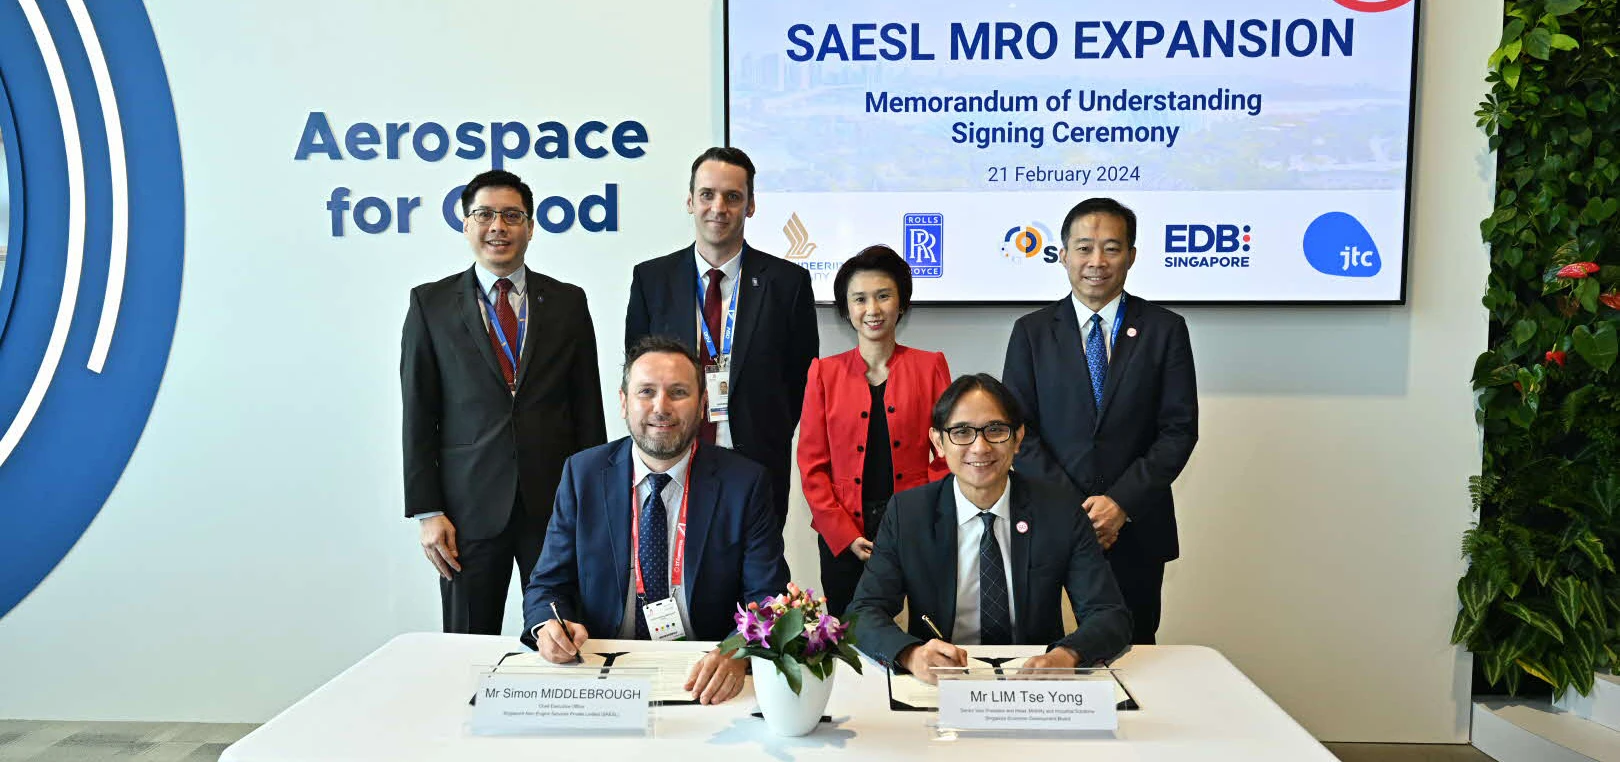 SAESL expands into new facilities to capture MRO growth with advanced technologies